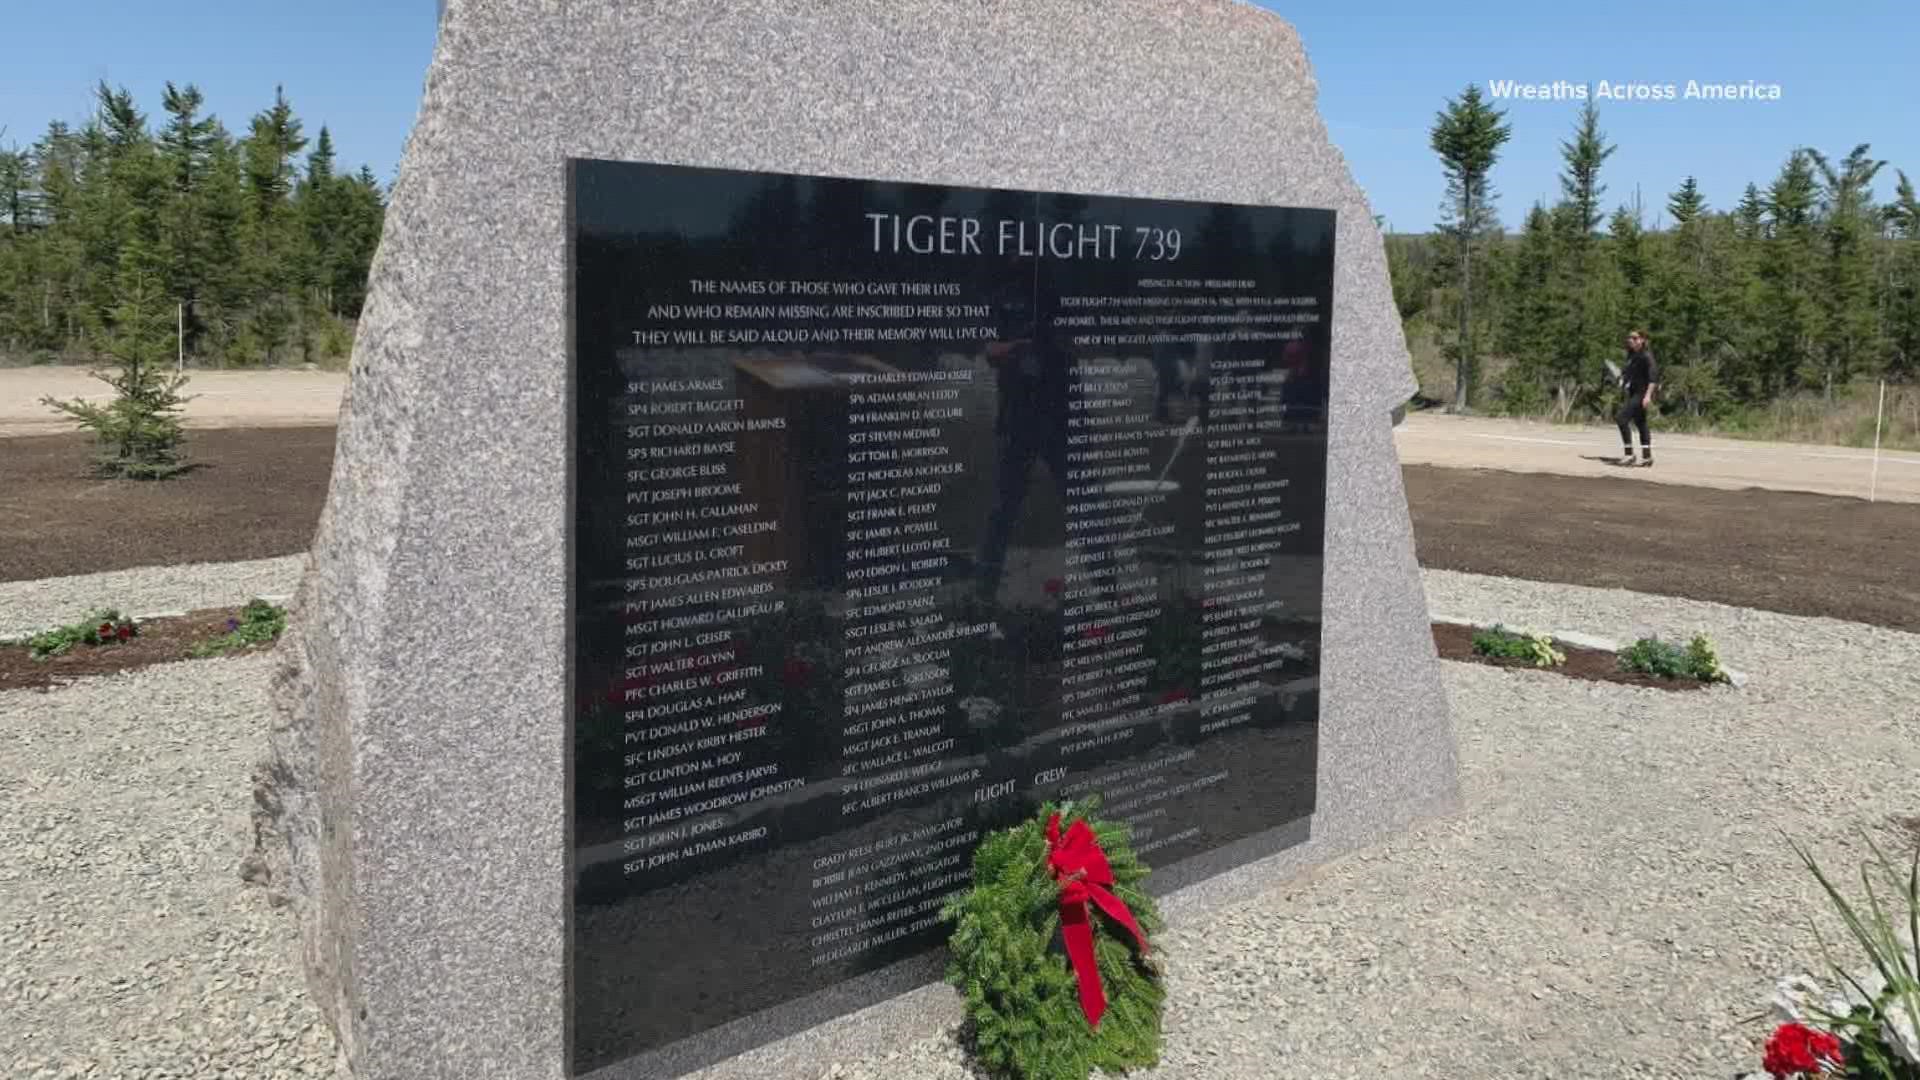 At a special ceremony back in May, with family members from around the country, Worcester unveiled the monument to the 93 rangers of Flying Tiger Flight 739.